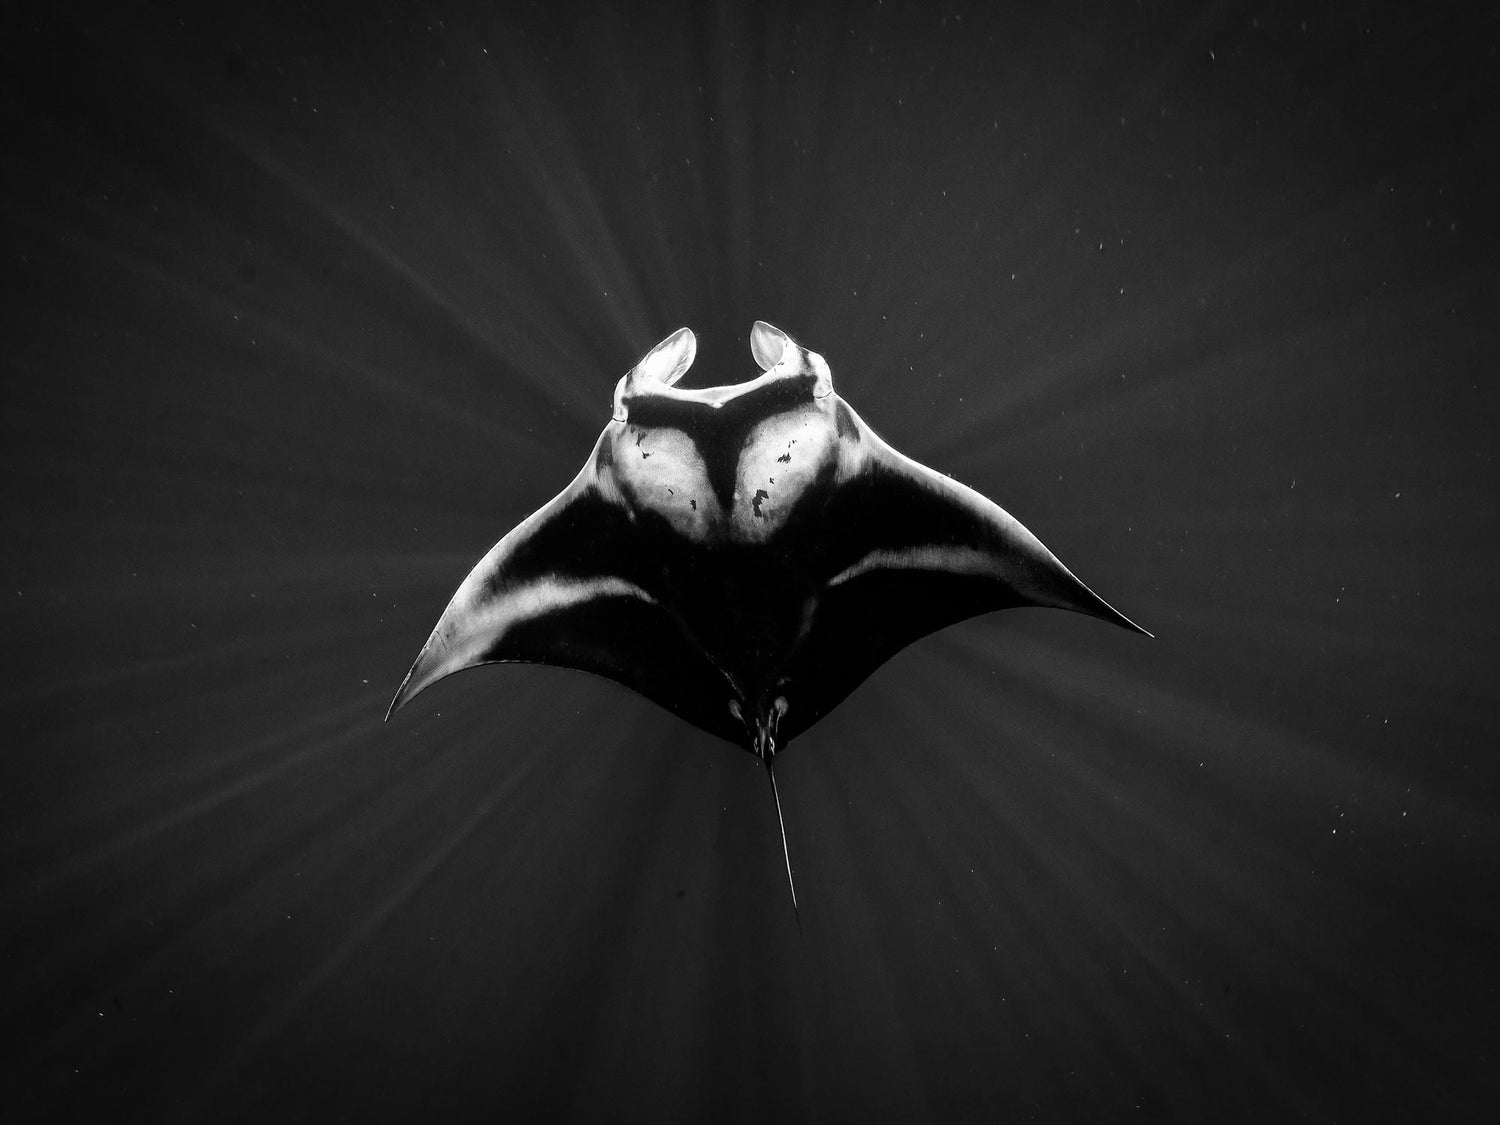 Manta Rays Underwater Camera Settings and Technique